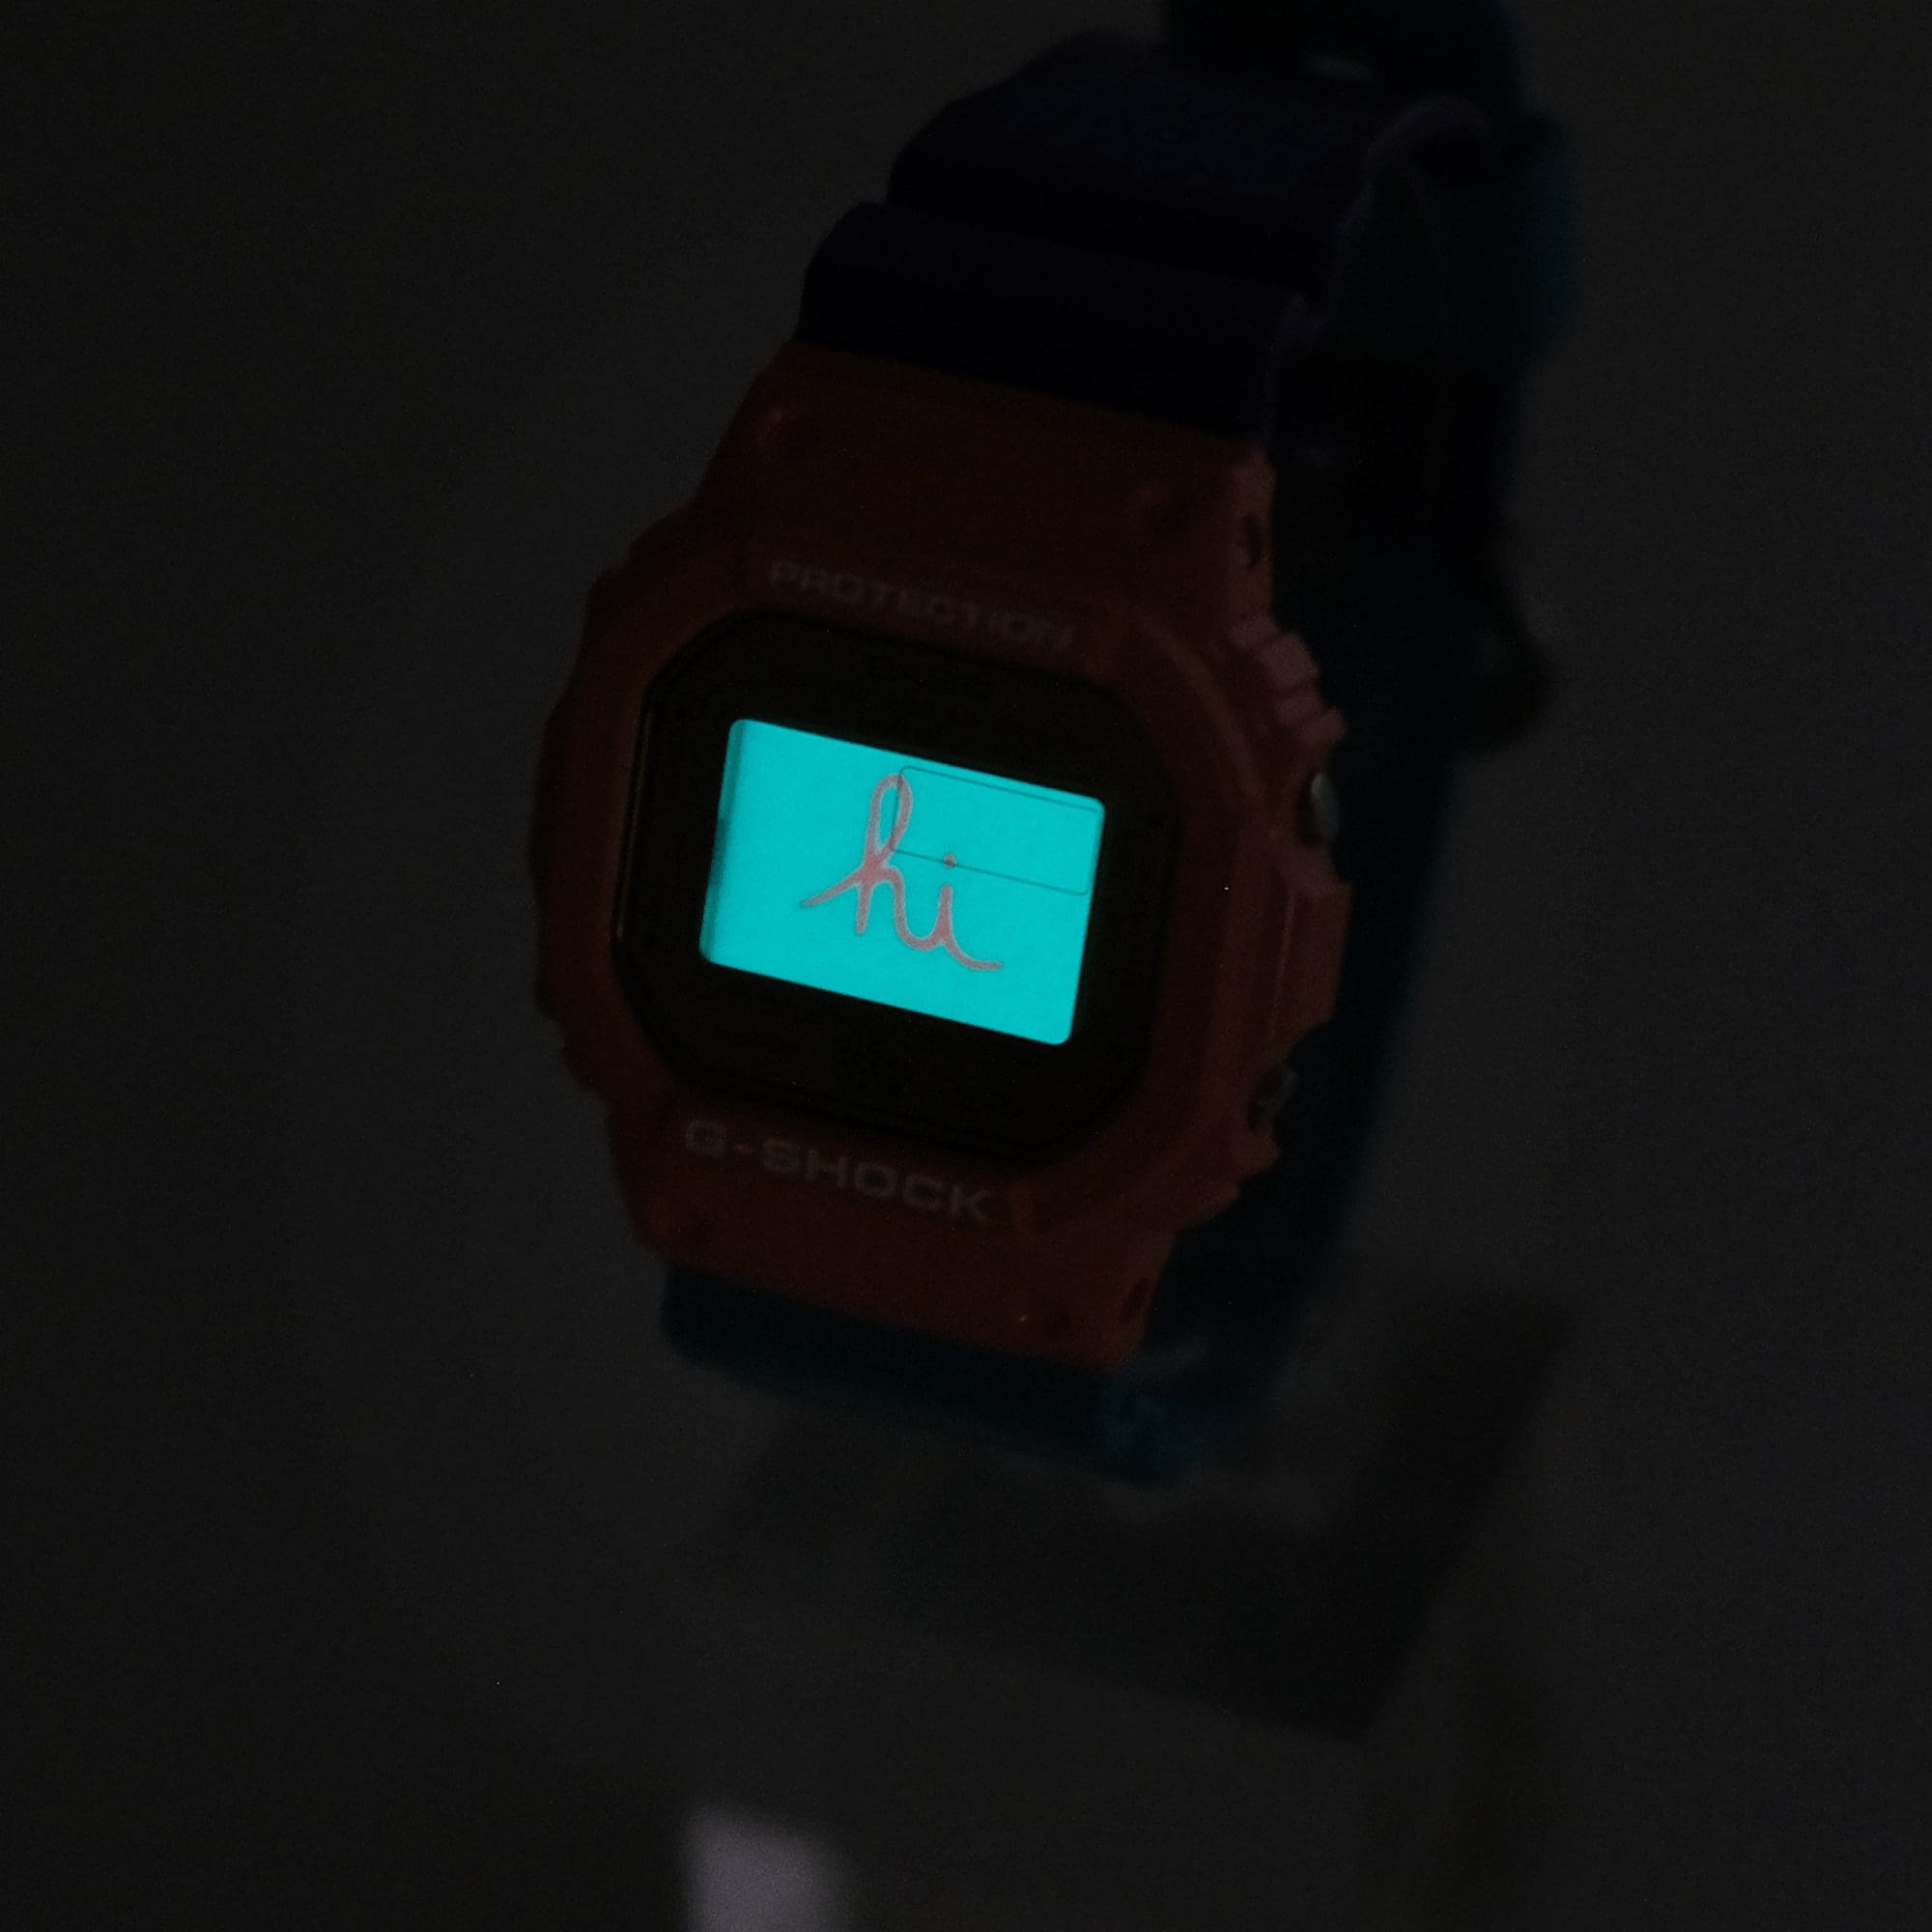 LED back light on G-SHOCK X In4mation DW5600IN4M234 digital watch